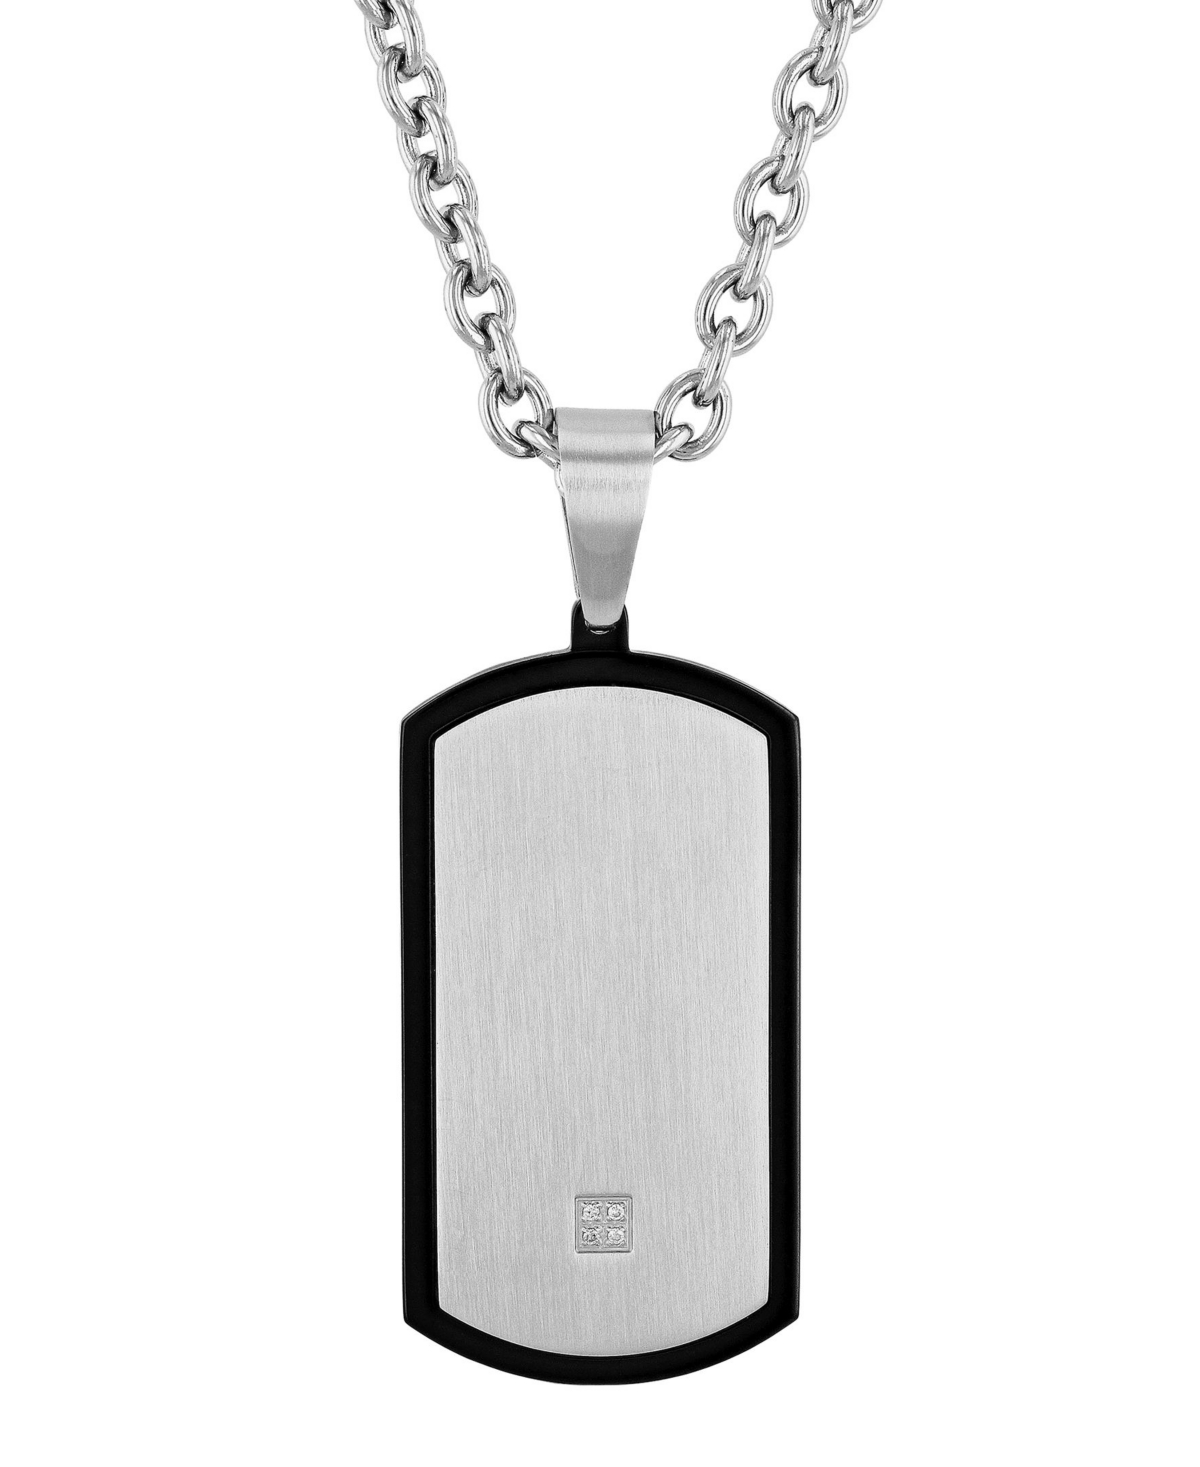 C & c Jewelry Men's Diamond Accent Dog Tag in Two-Tone Stainless Steel Pendant Necklace